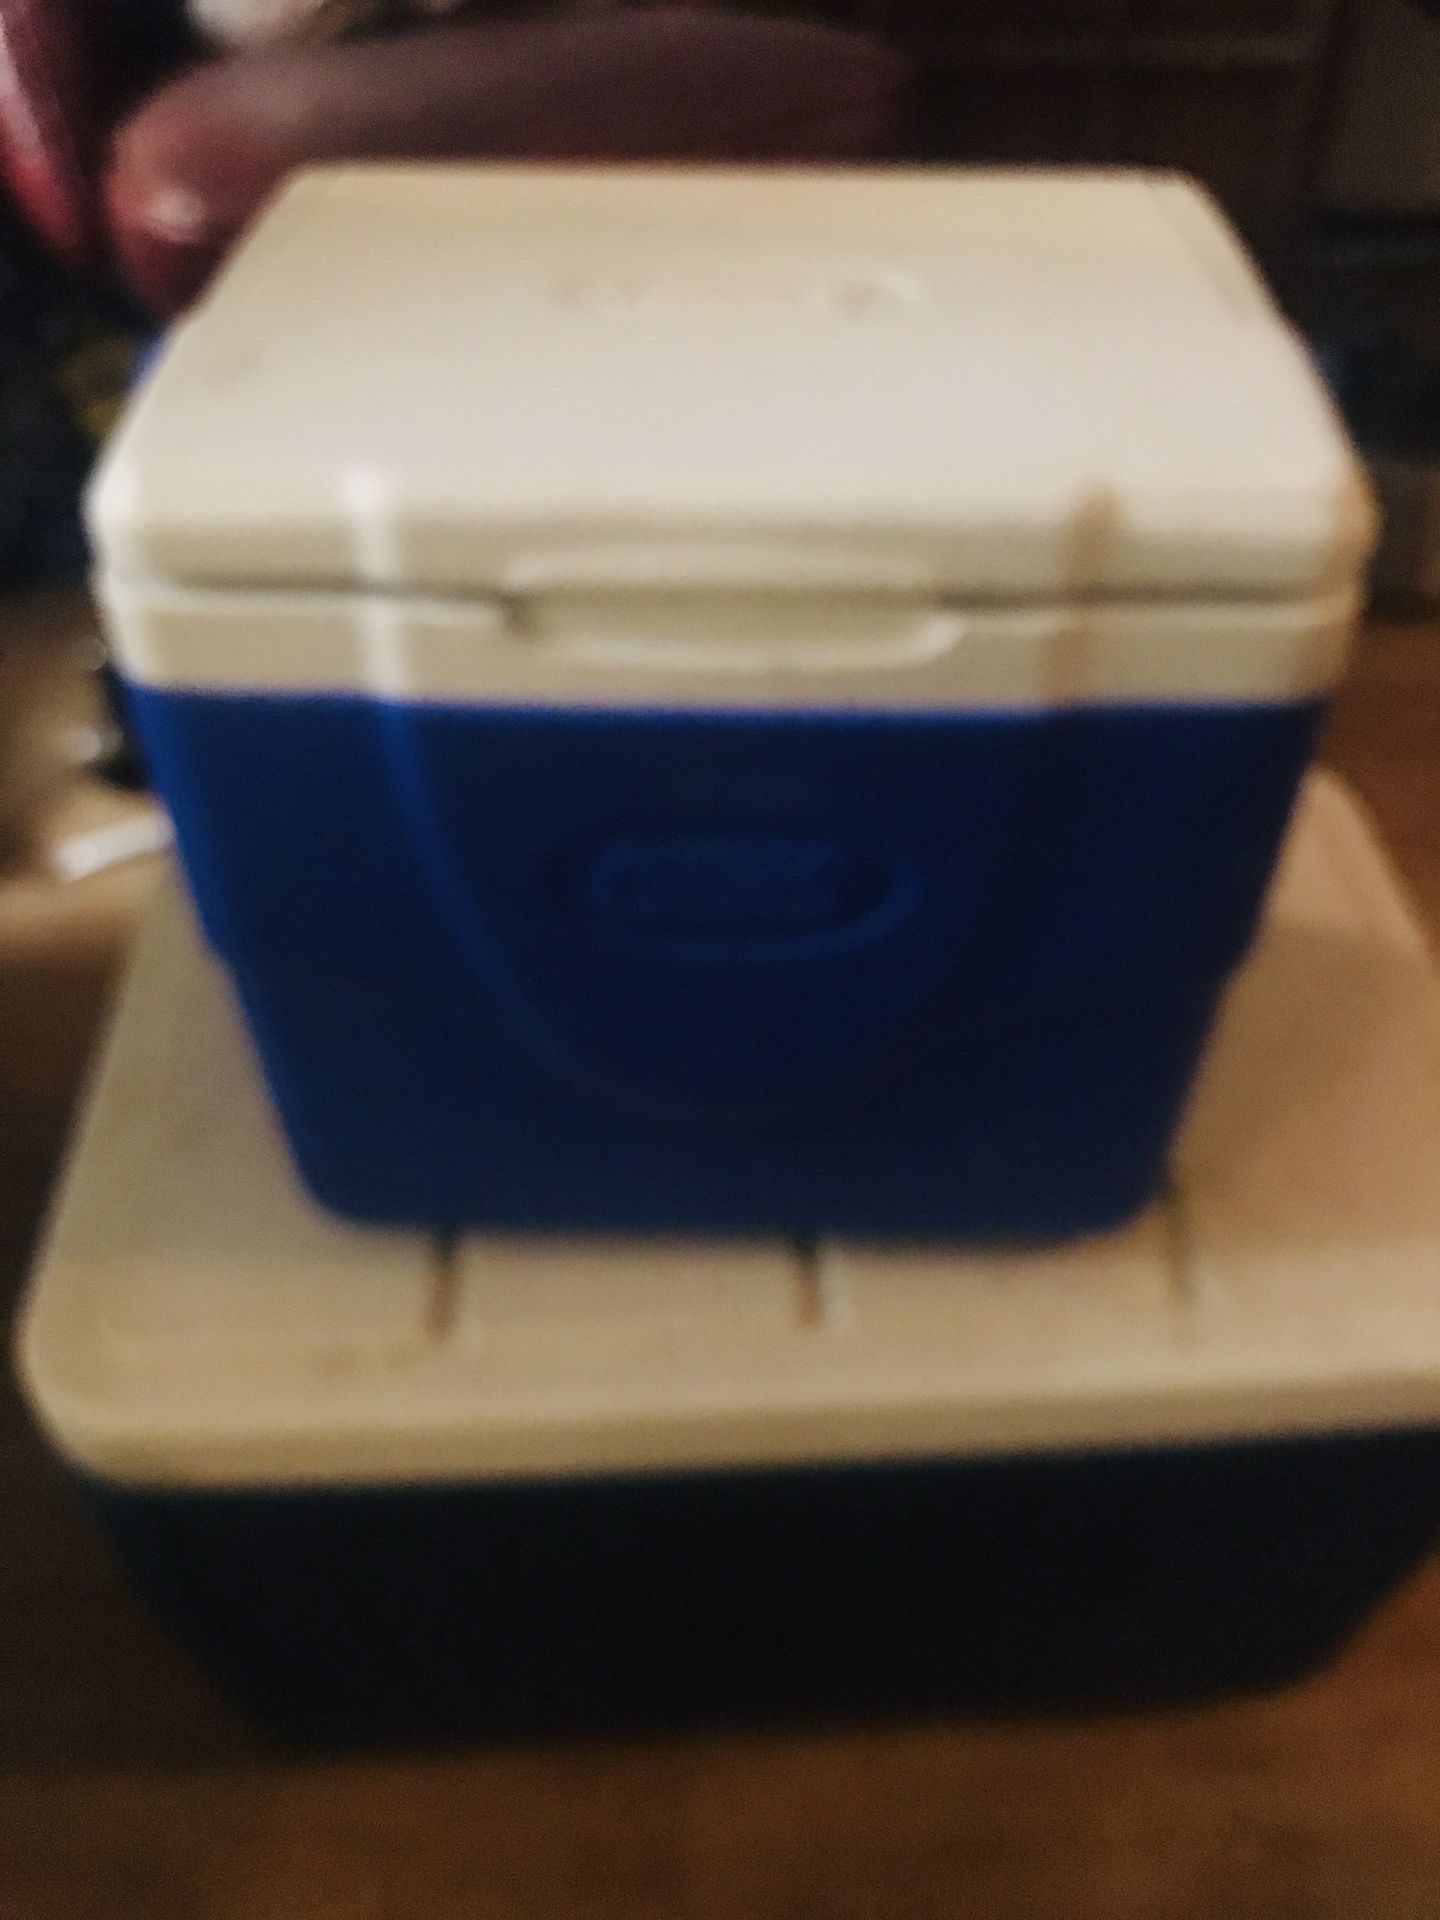 2 Coleman coolers $5 FOR BOTH!!!!